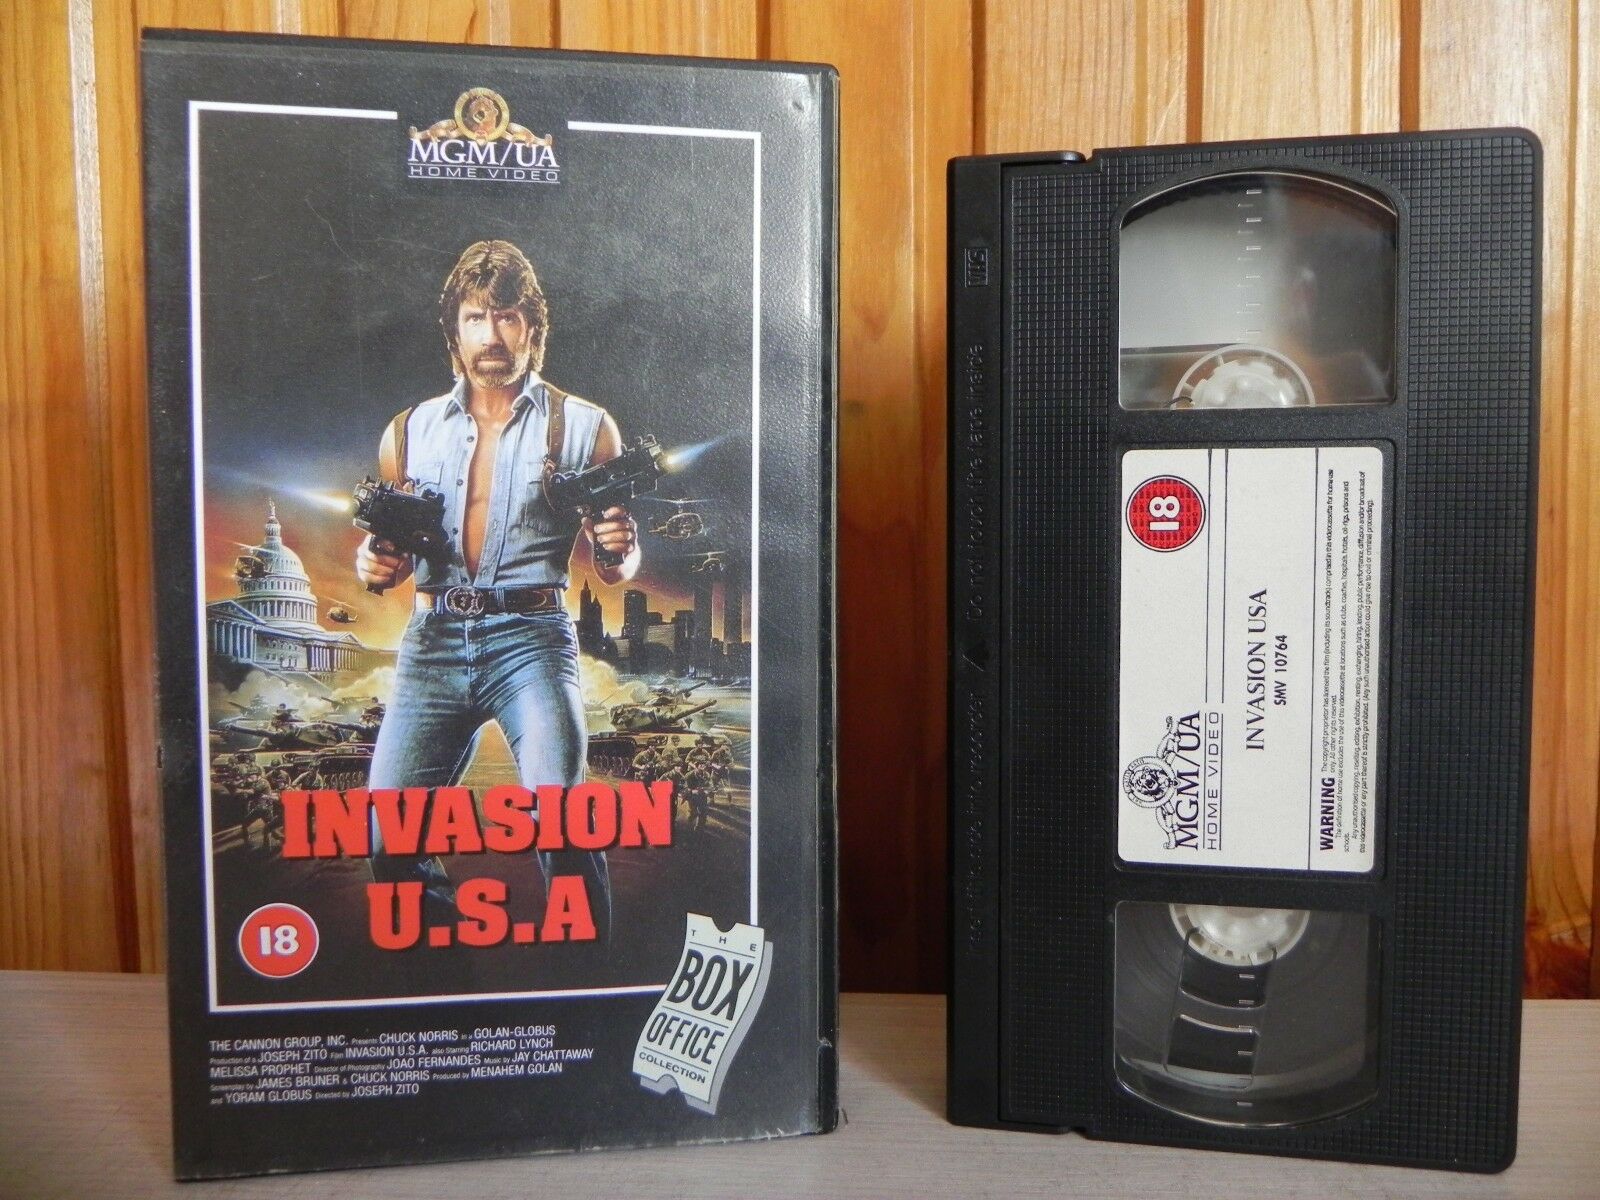 Invasion U.S.A. - MGM/UA Home Video - Cert (18) - Chuck Norris - Action - VHS-